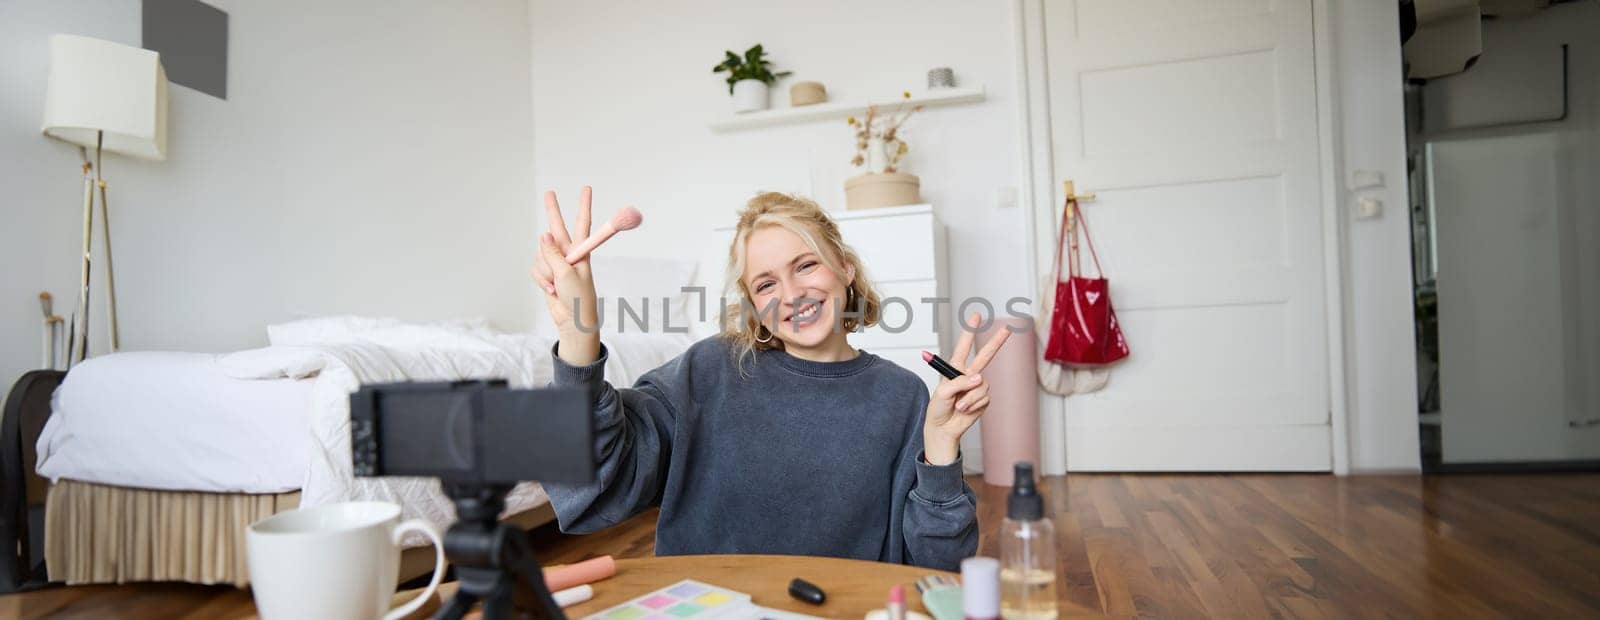 Portrait of young blond woman, teenage girl records video for her social media account, shows makeup on camera, recommends lipstick to online followers, creates content in her room.